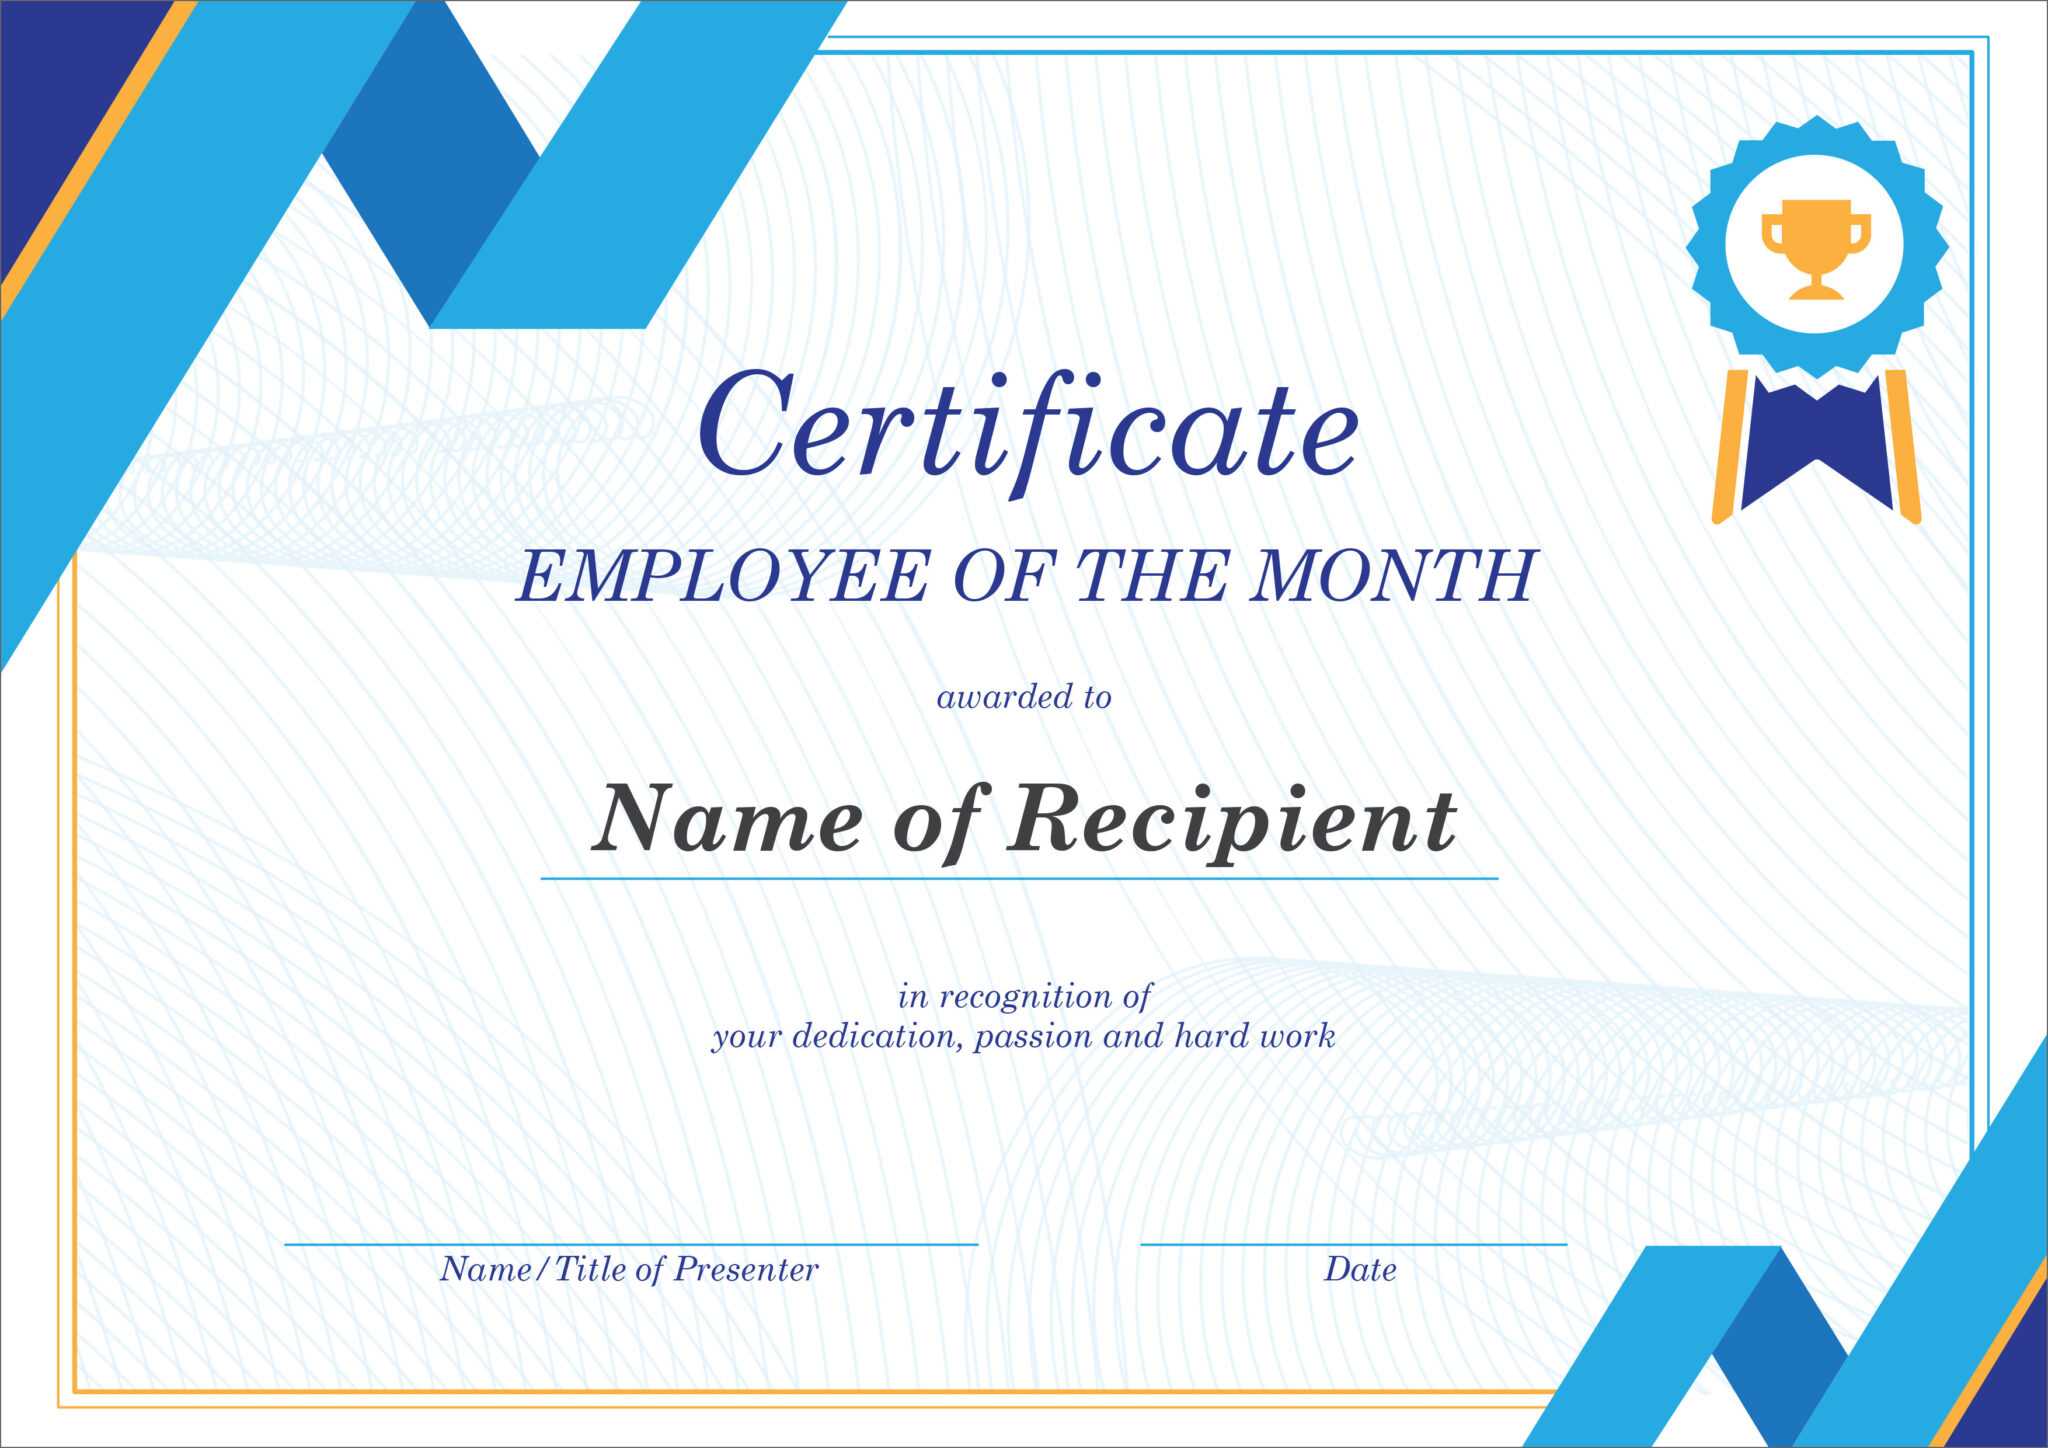 Teacher Of The Month Certificate Template Sample Professional Templates